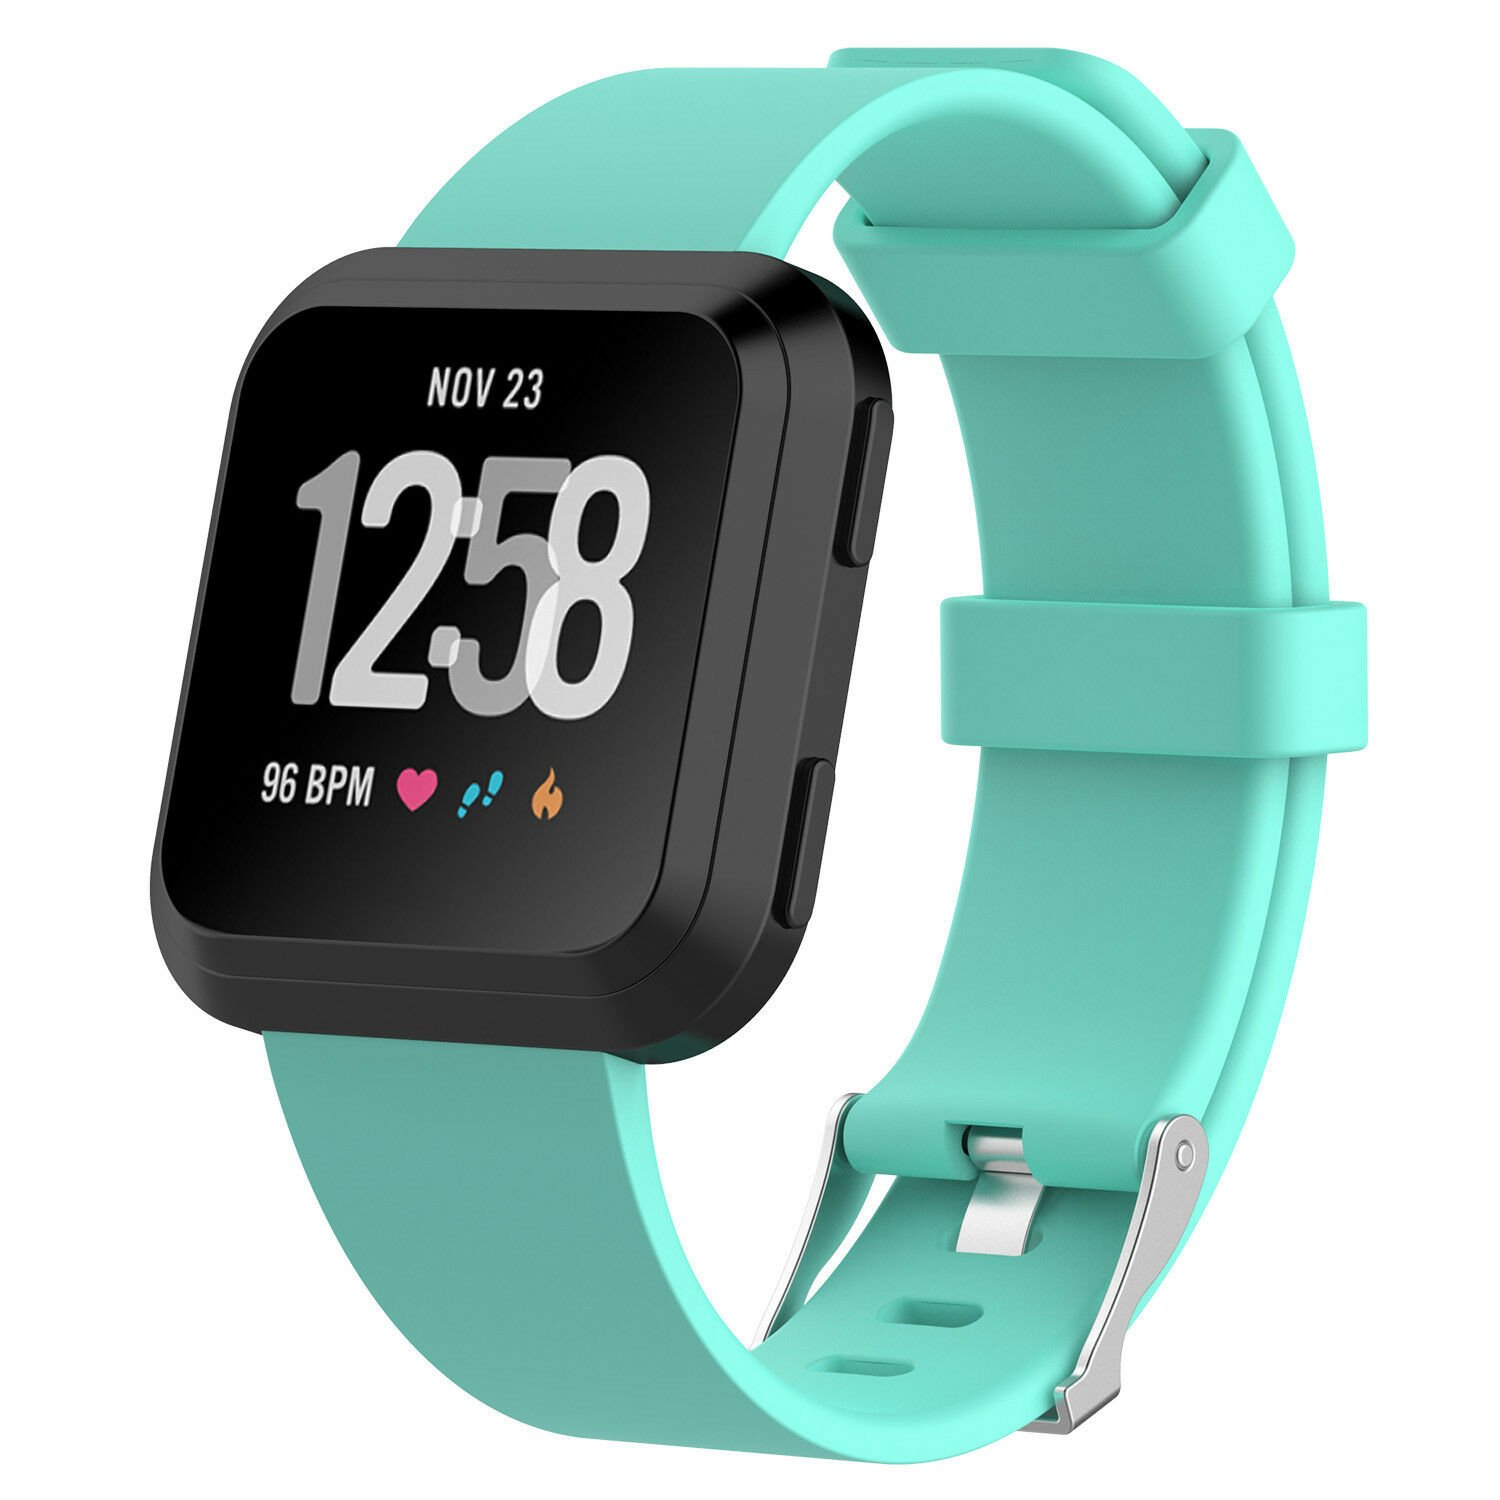 Replacement Silicone Rubber Band Strap Wristband For Fitbit Versa 1 2 ...